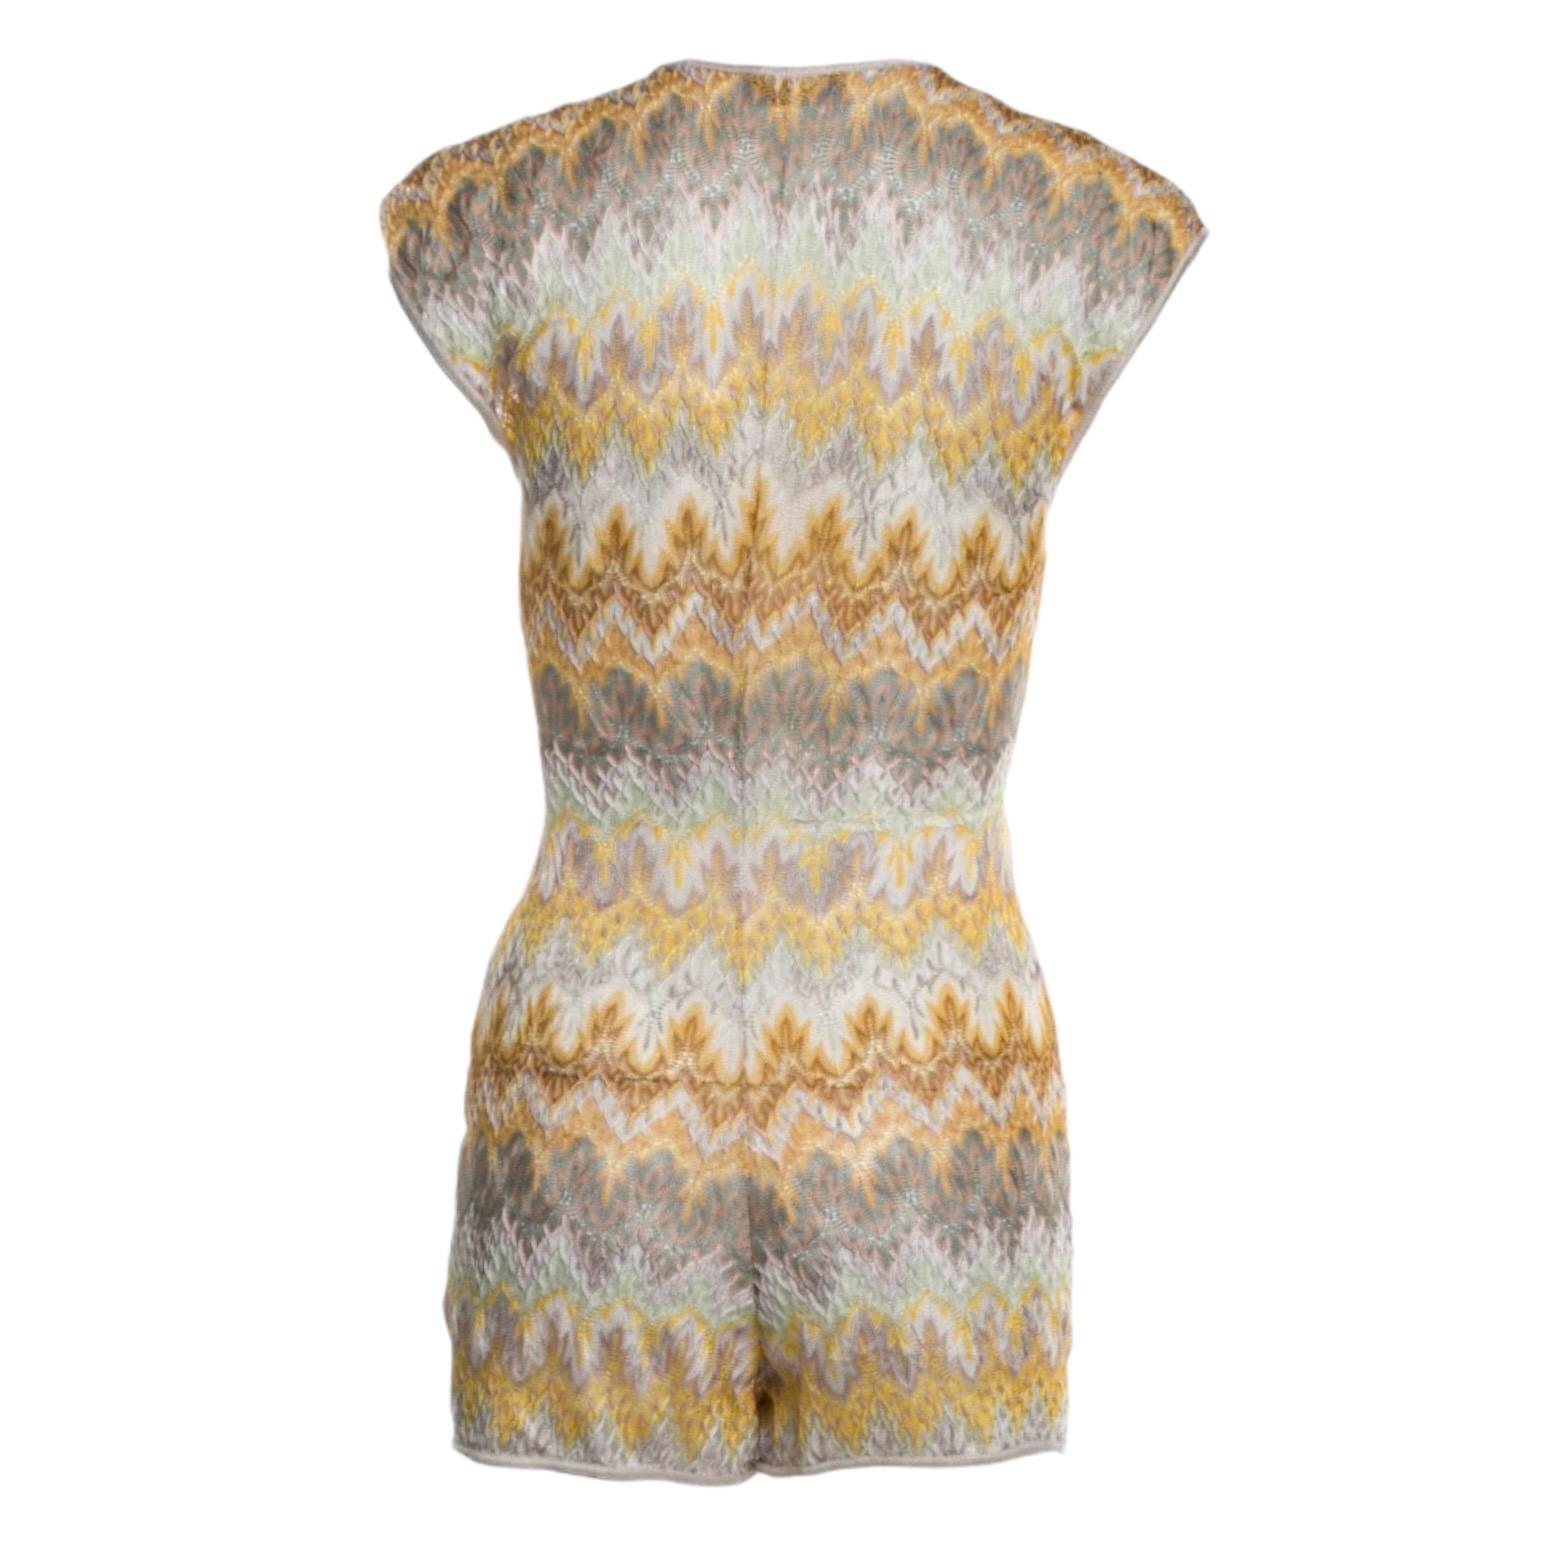 
Rare MISSONI signature zigzag crochet knit playsuit
Immediately sold out - no longer available in stores
Stunning pastel colors - yellow, mint, greens, whites - so versatile! 
Bowtie in front
Cut out style
Simply slips on
Dry Clean only
Made in